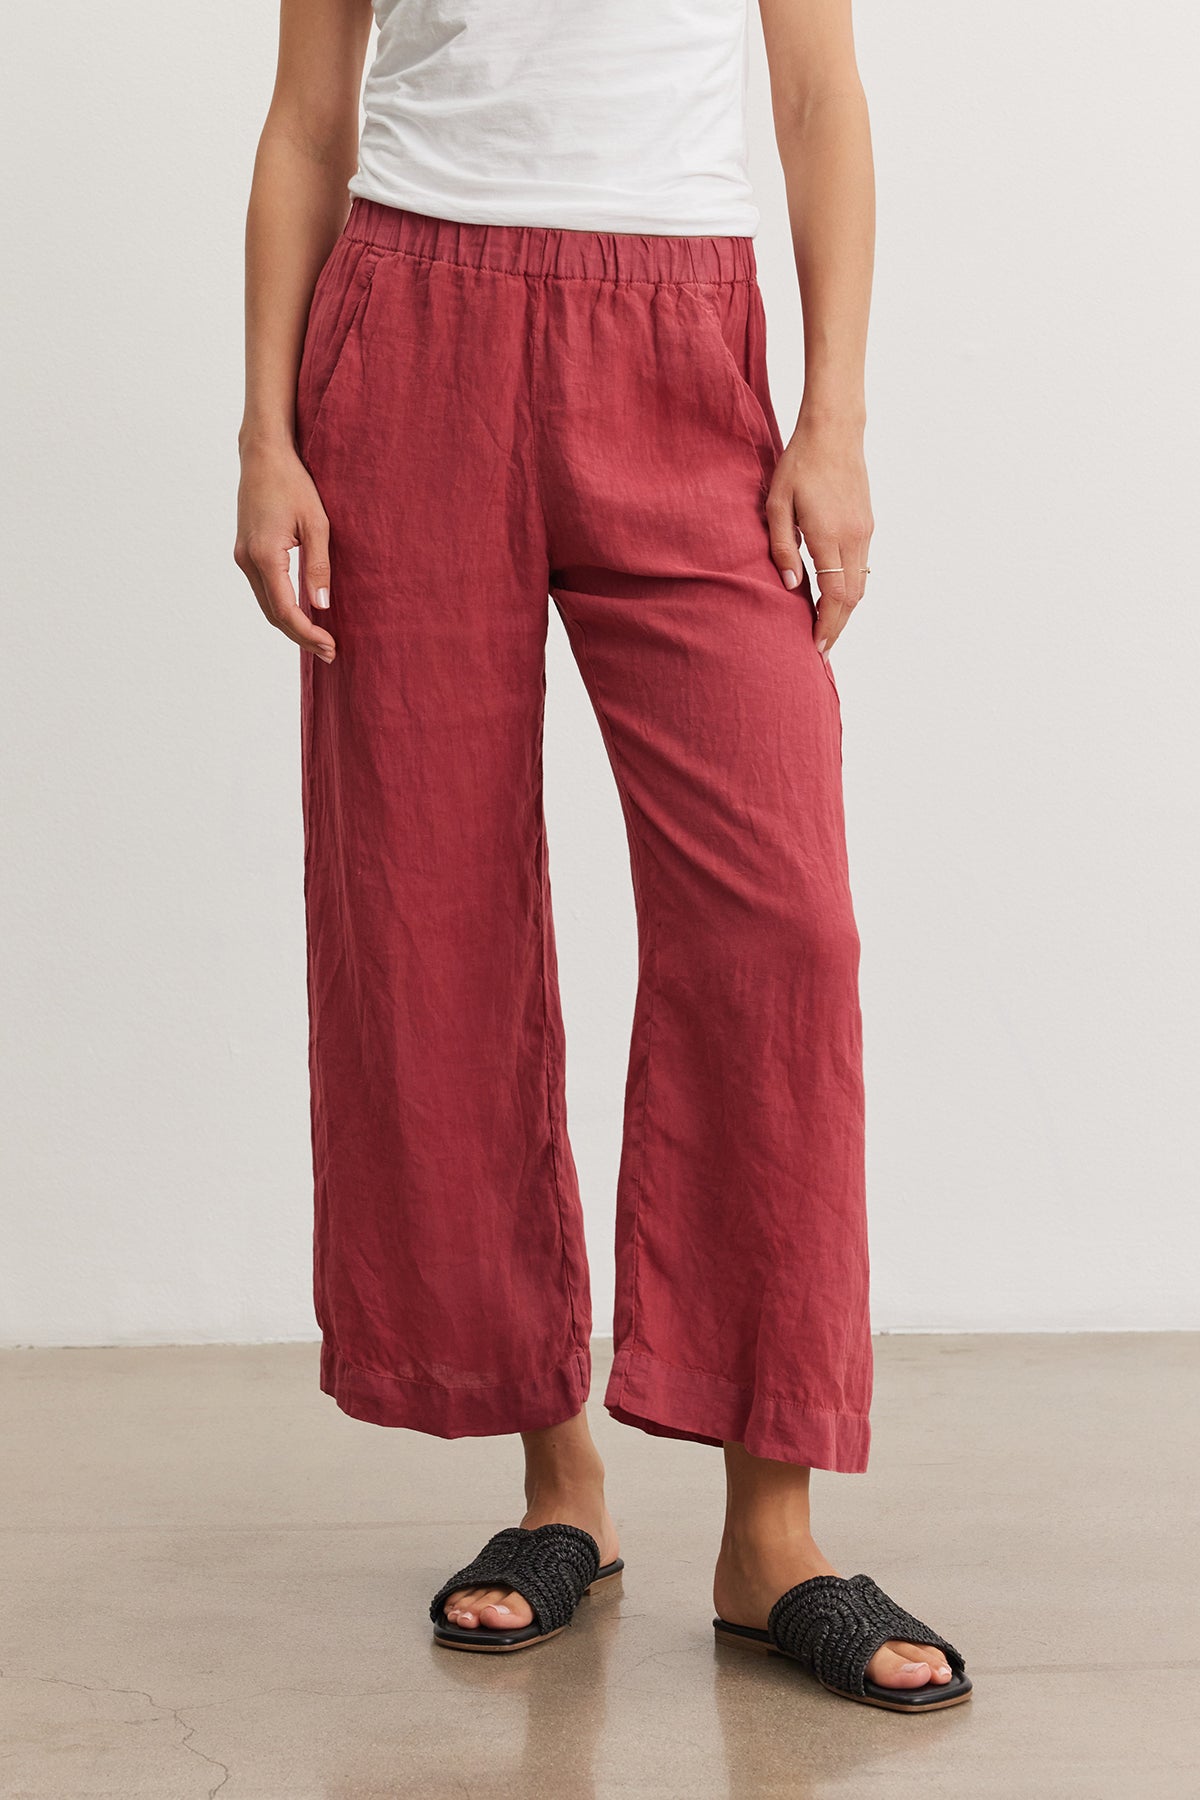 A person wearing the LOLA LINEN PANT by Velvet by Graham & Spencer with an elastic waist and a white top paired with black slide sandals, shown from the waist down in a neutral setting.-36909573308609